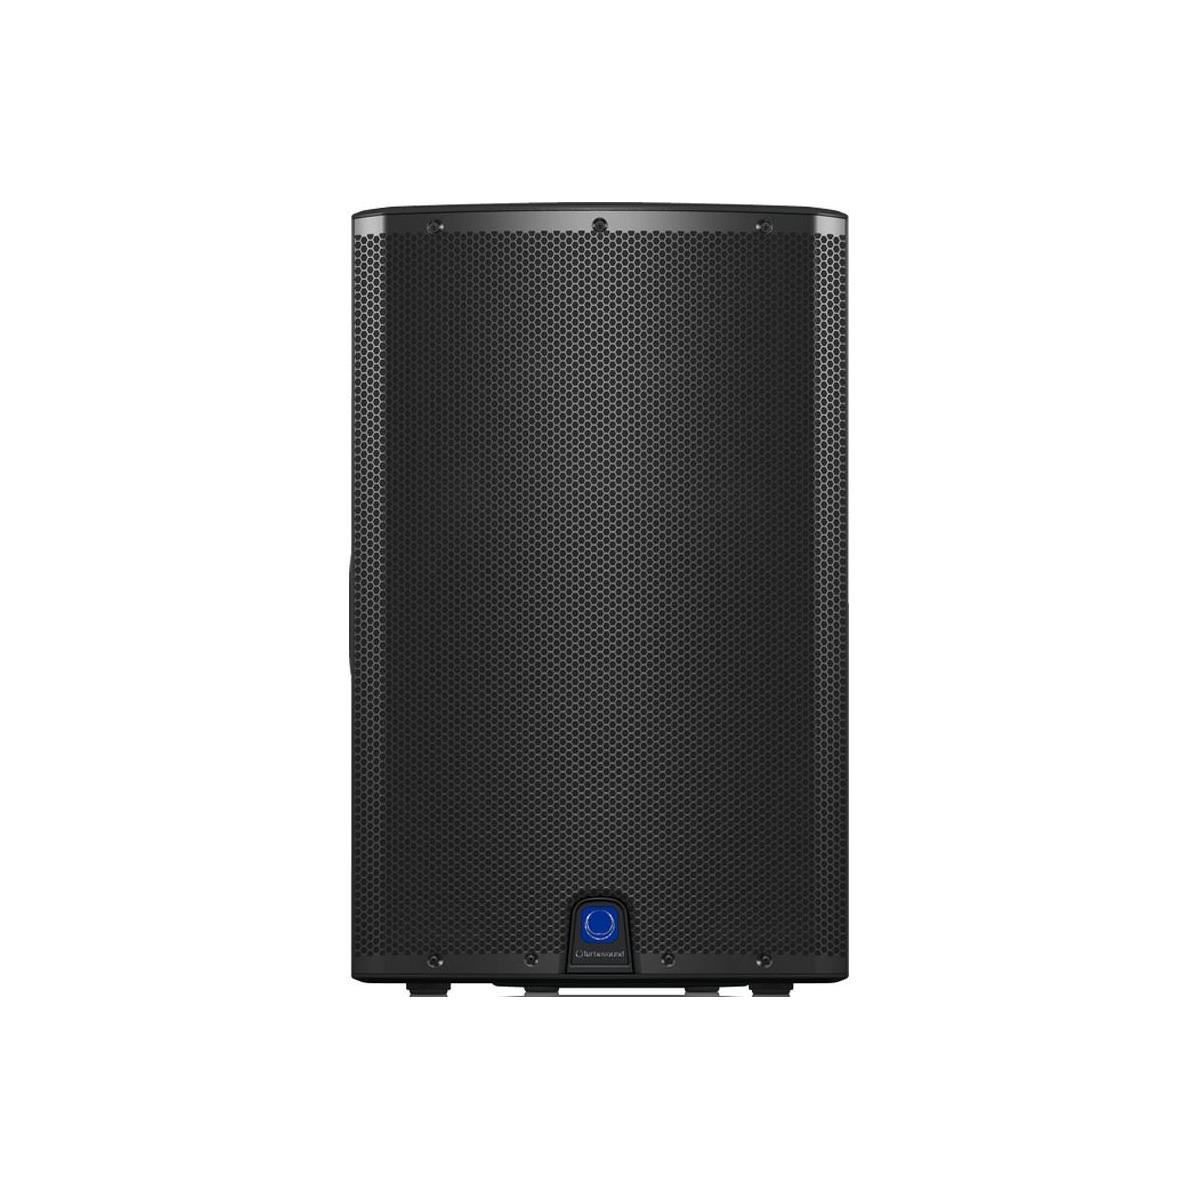 Turbosound iX15 2-Way 1000W 15" Powered Loudspeaker with Bluetooth and DSP -  000-BJY02-00010